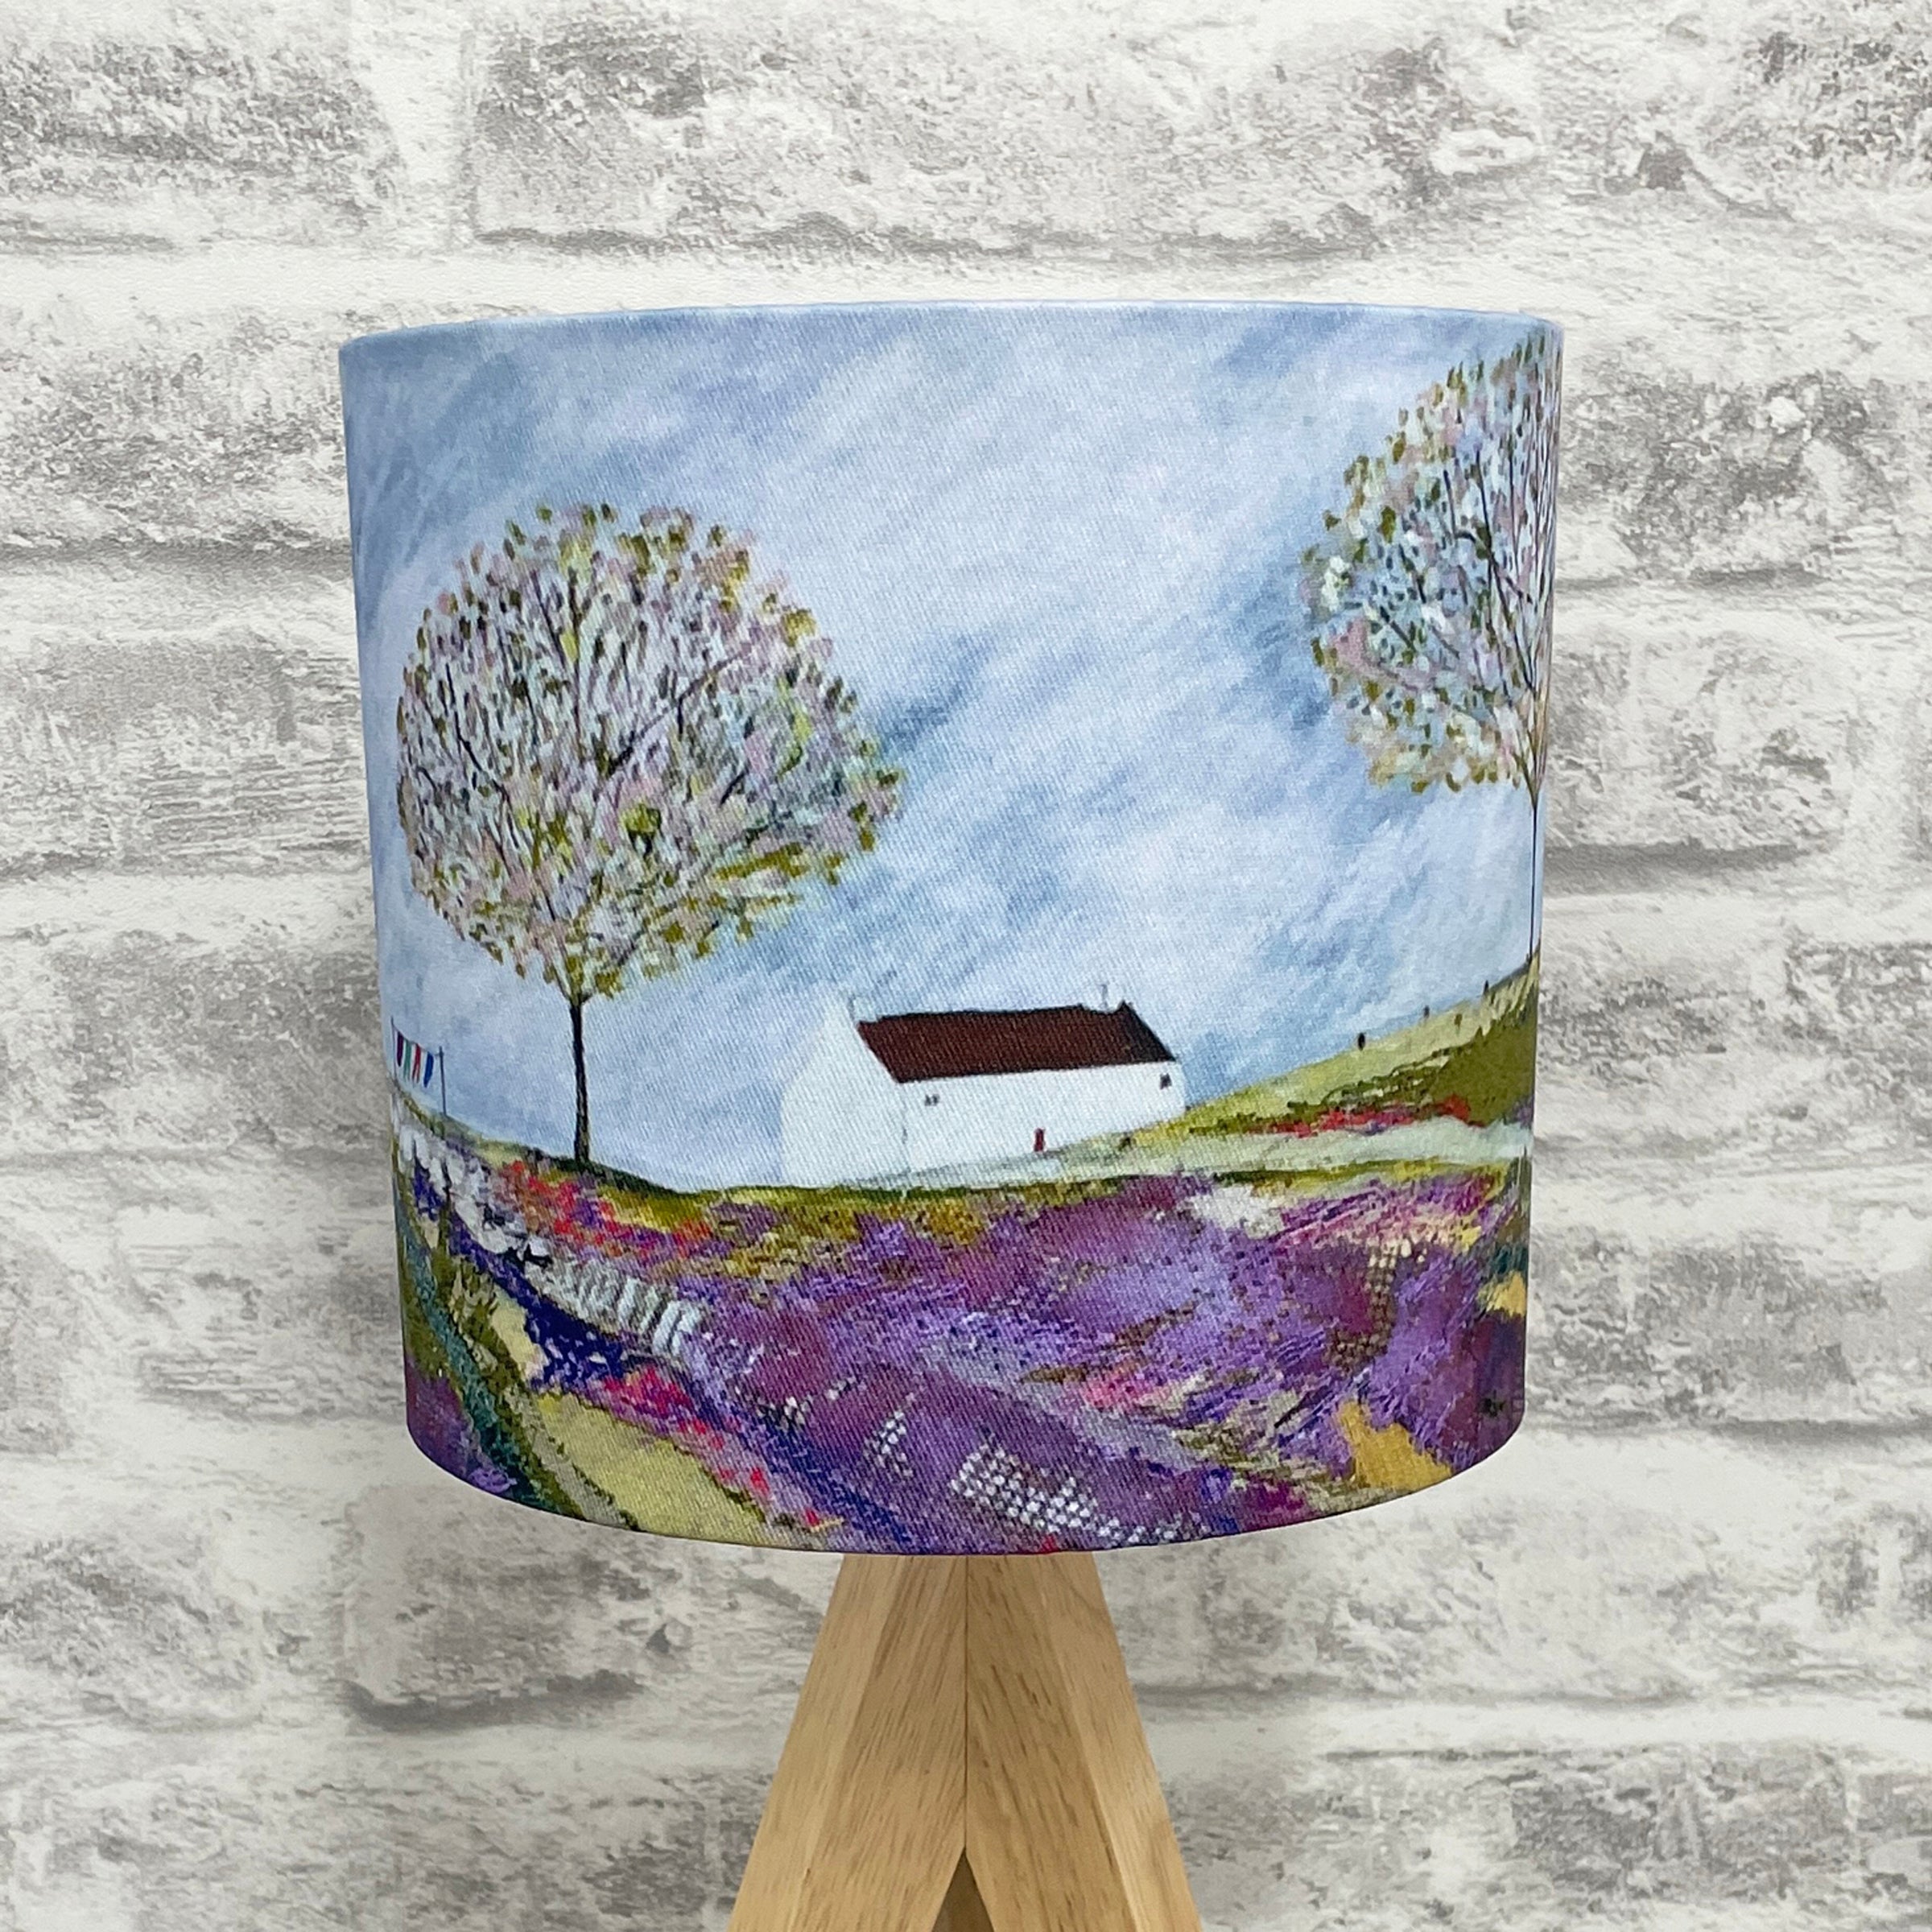 Homeware - Lampshade  "Down to the village"